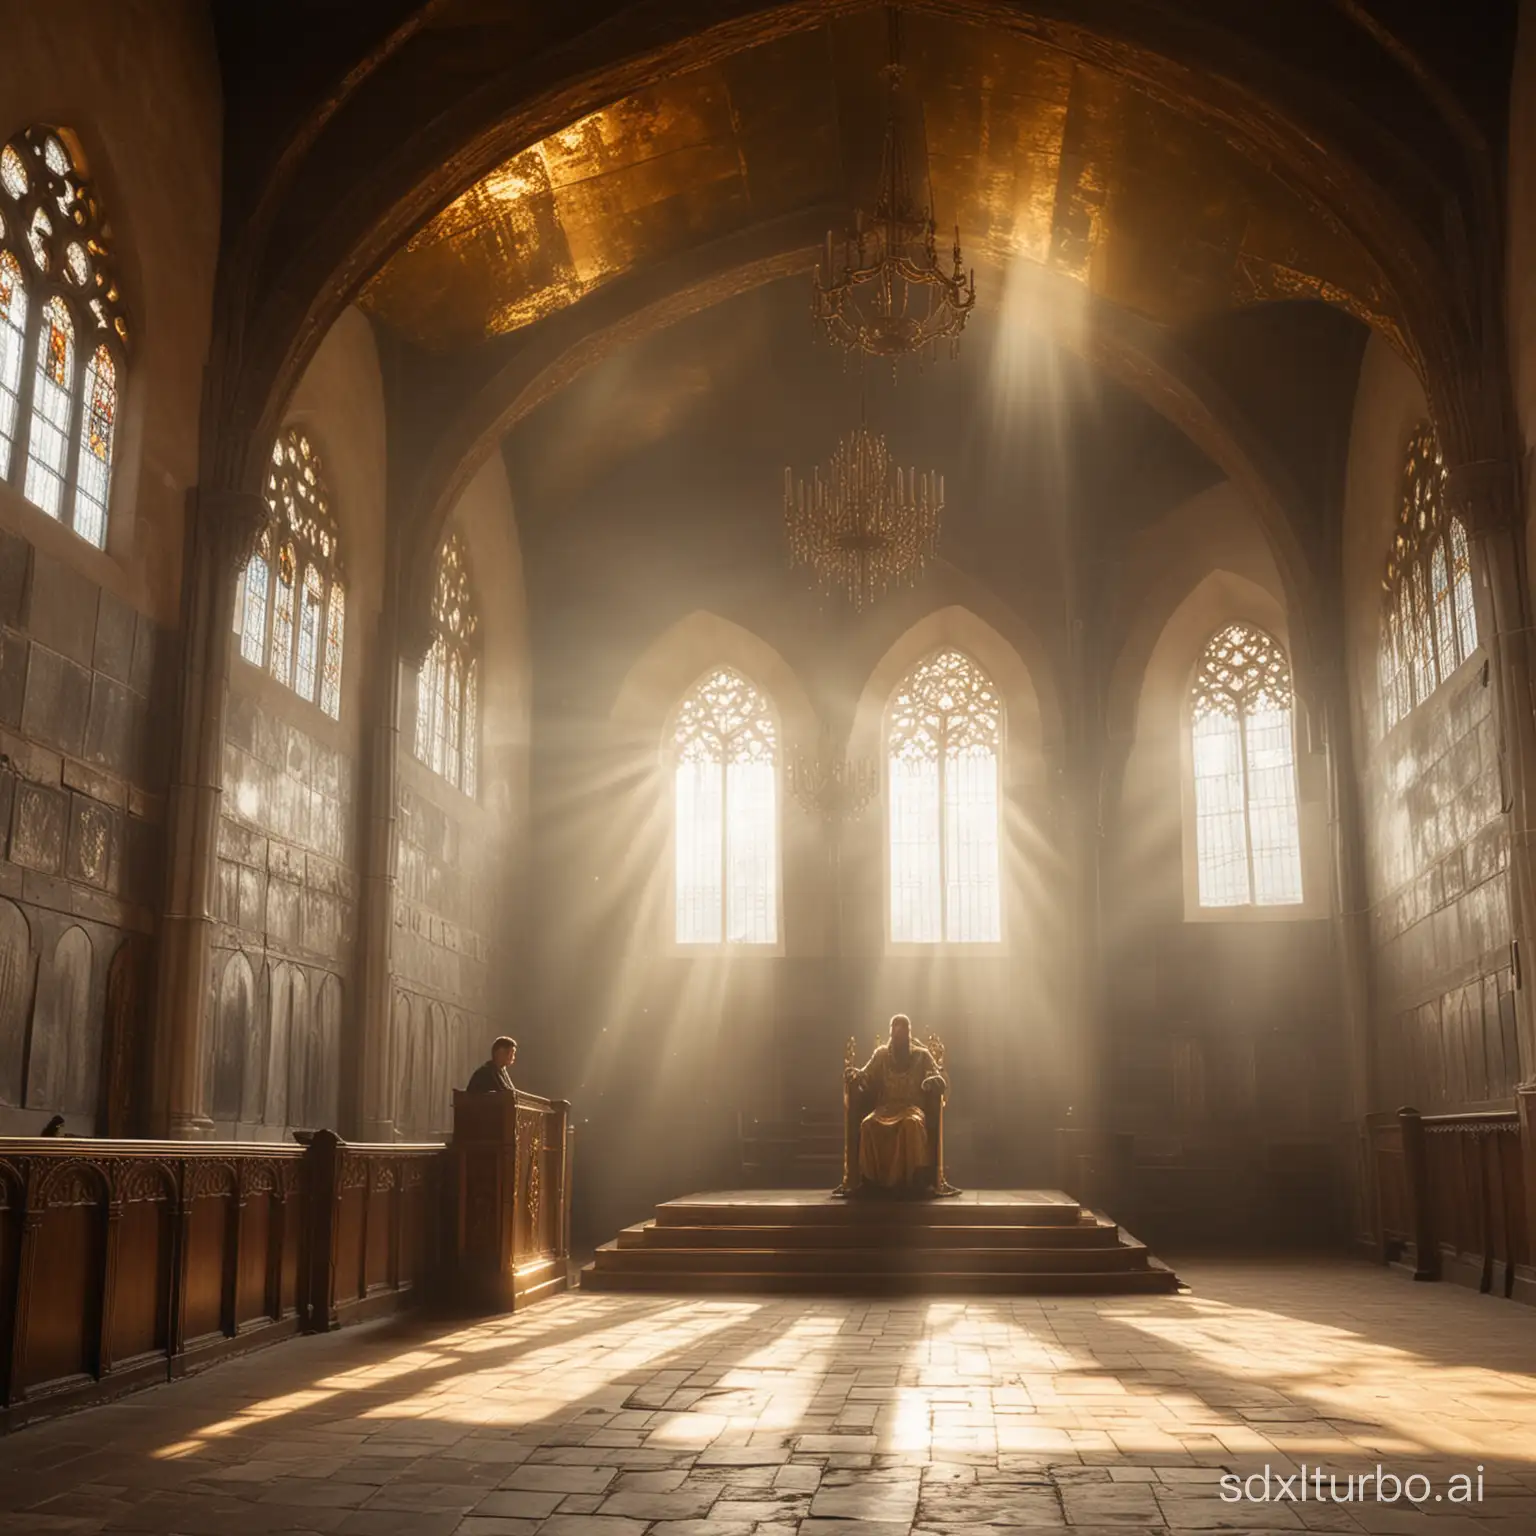 Spacious church hall, on a high platform there is a throne of gold, a man sits on it, his face hidden by rays of the sun breaking through a window offscreen, medieval style